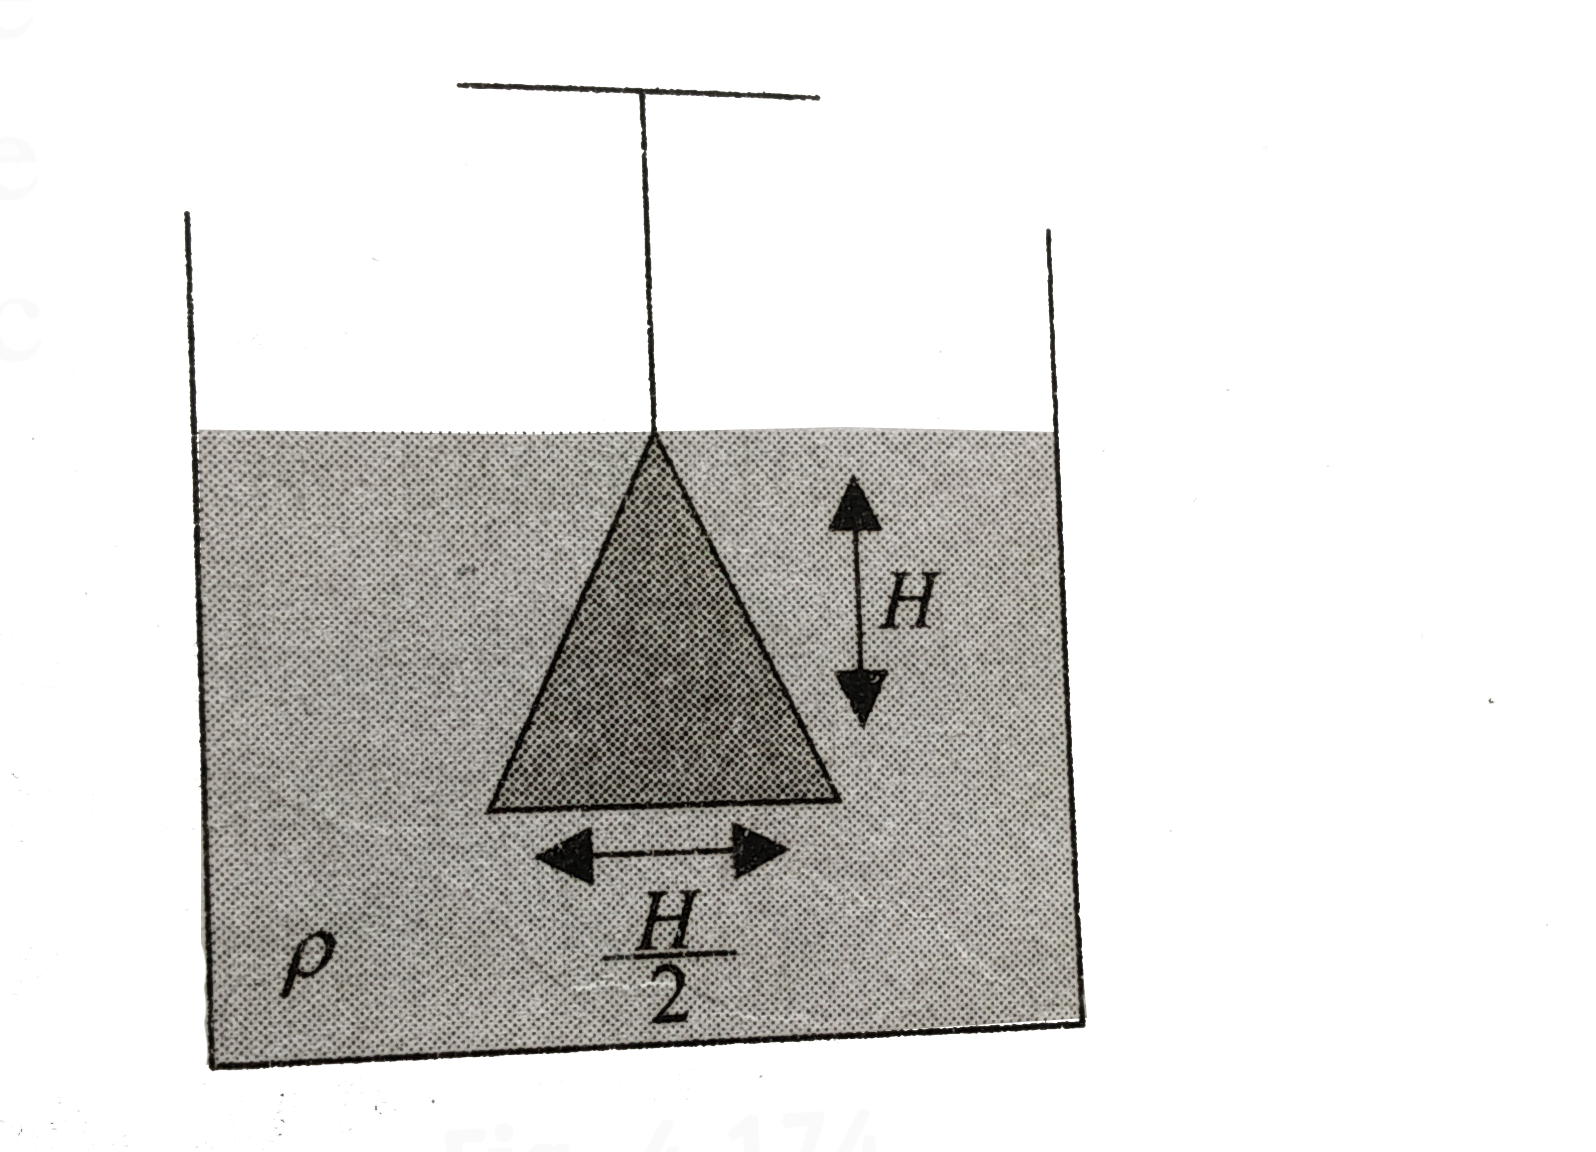 A solid cone of height H and base radius H/2 floats in a liquid of density rho. It is hanging from the ceiling with the help of a string. The force by the fluid on the curved surface of the cone is (P(0) = atmospheric pressure)